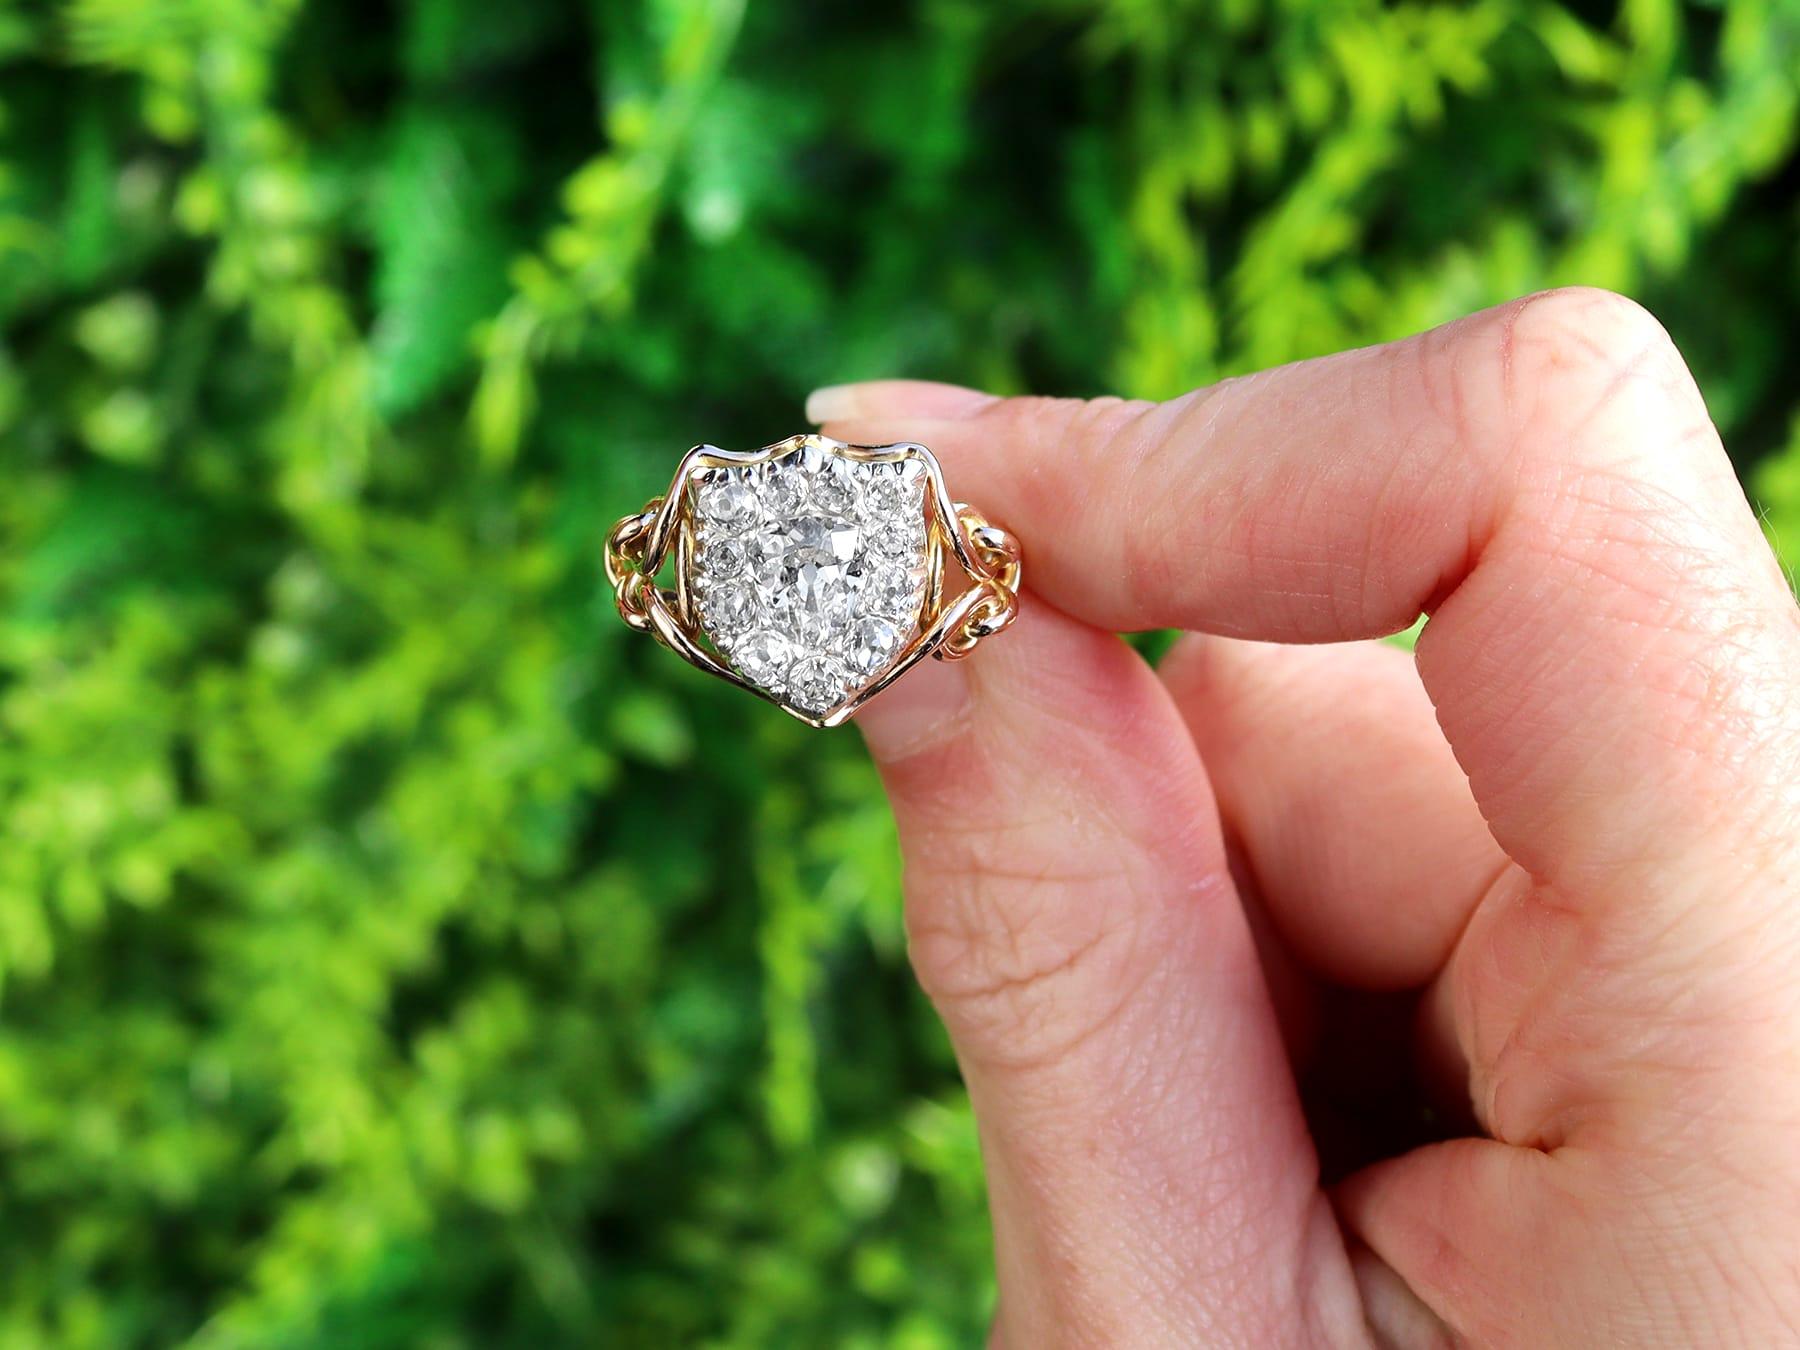 A stunning, fine and impressive antique Victorian 2.05 carat diamond and 18 karat yellow gold, silver set dress ring; part of our diverse 1890s jewellery and estate jewelry collections

This stunning, fine and impressive antique Victorian ring has